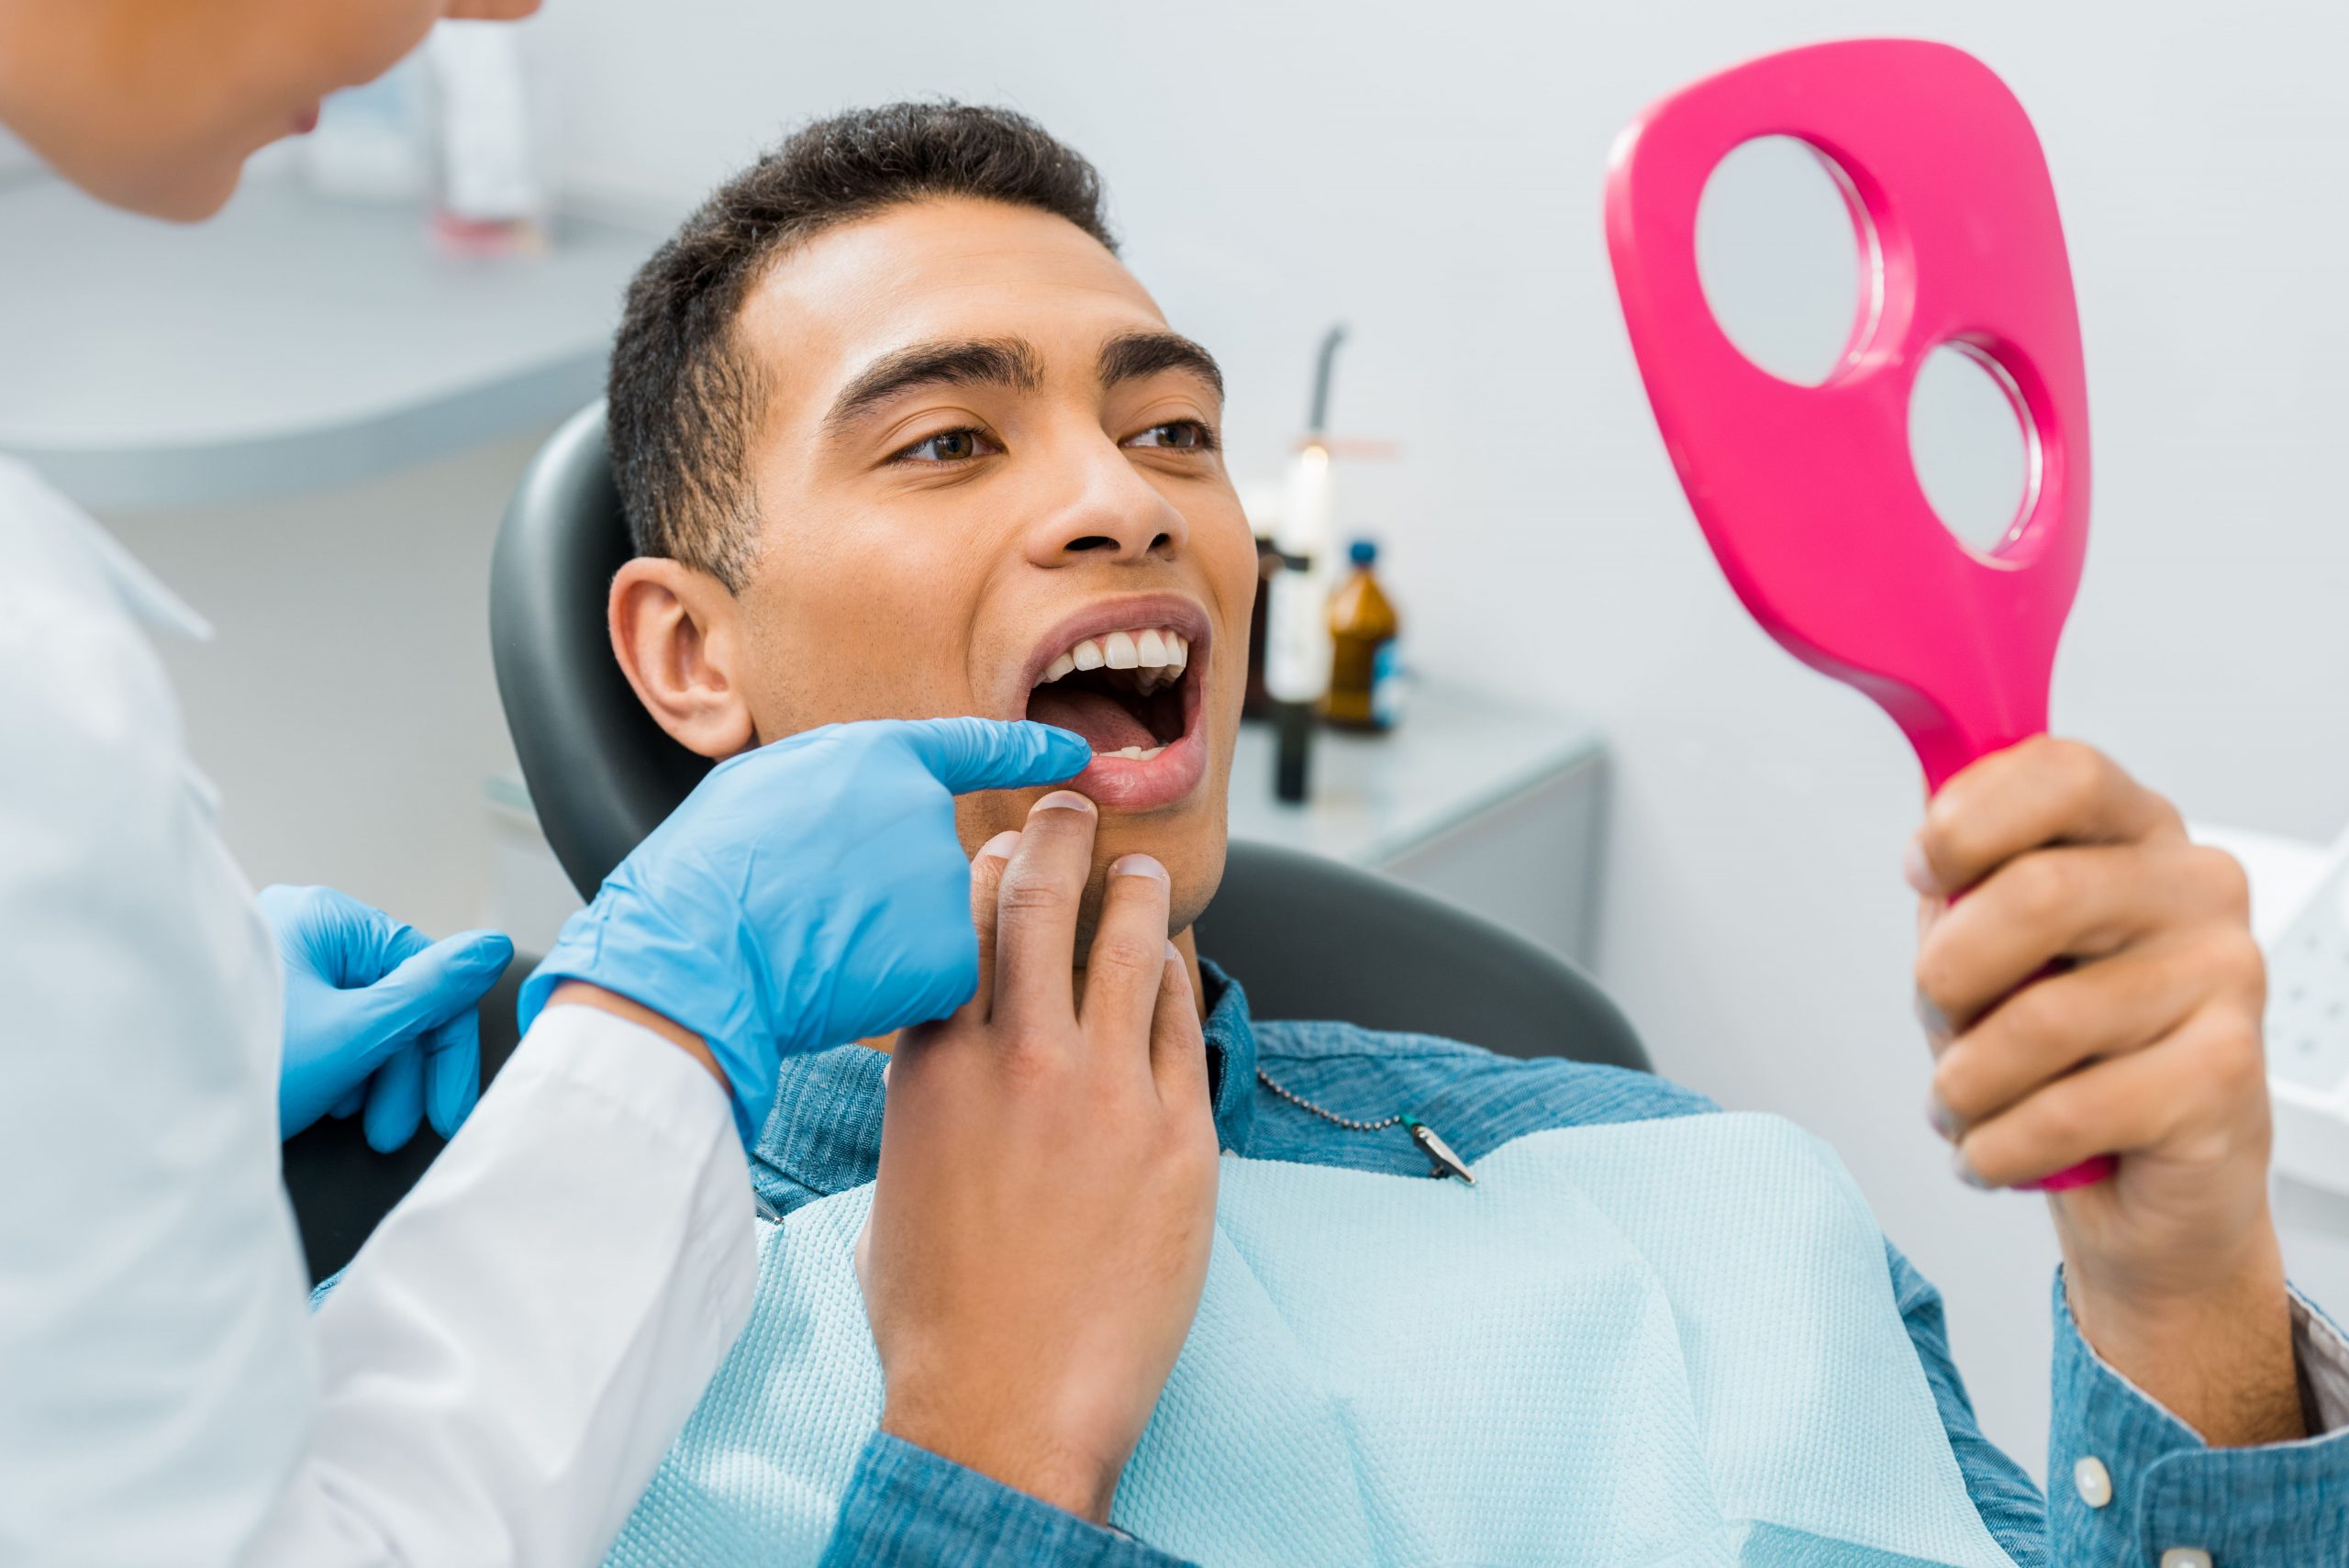 Teeth Straightening Options You need to know